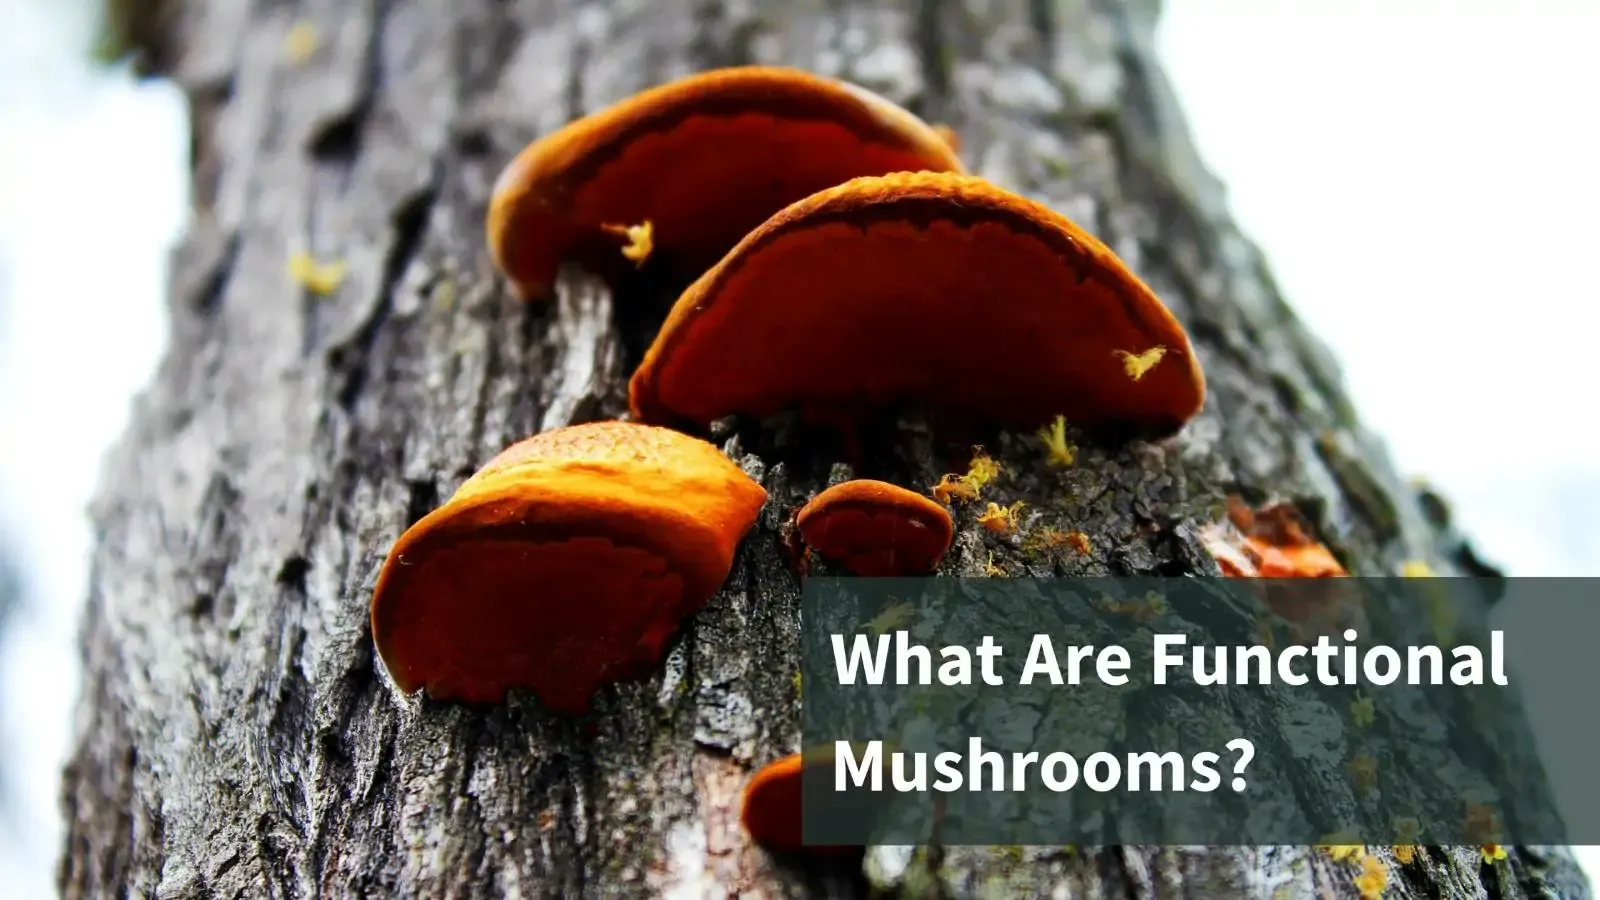 Mushrooms growing on tree bark. Text reads "What are functional mushrooms?"